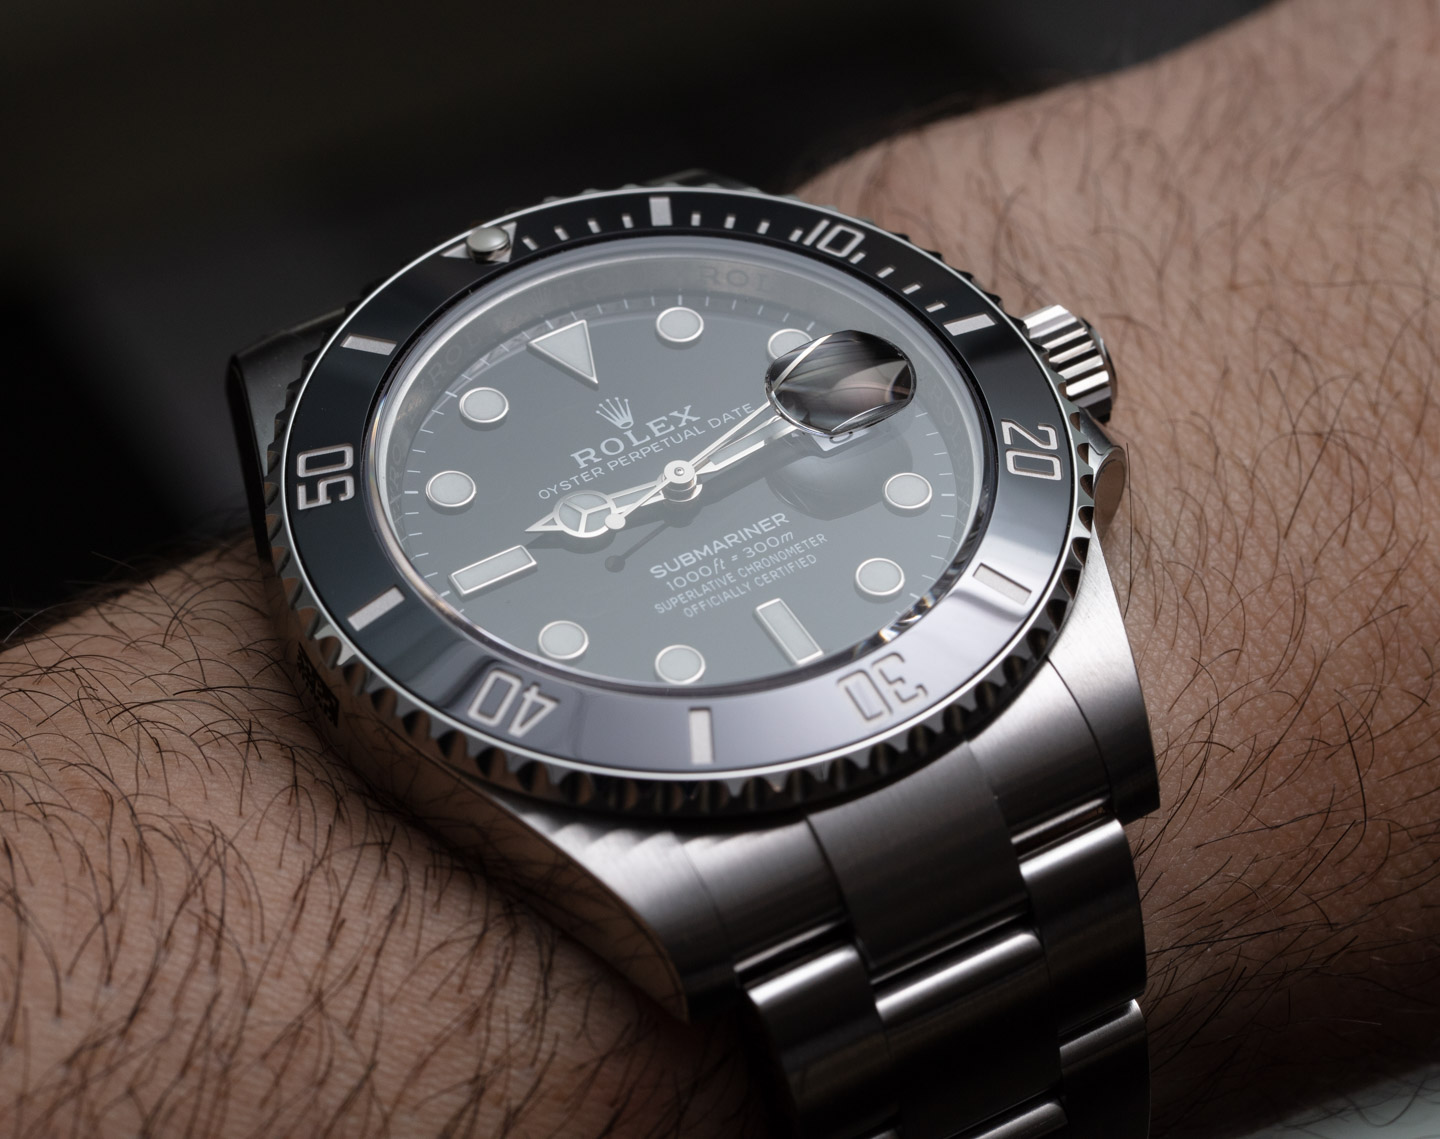 Rolex Submariner 126610LN. Yes it does exist, and yes you can get